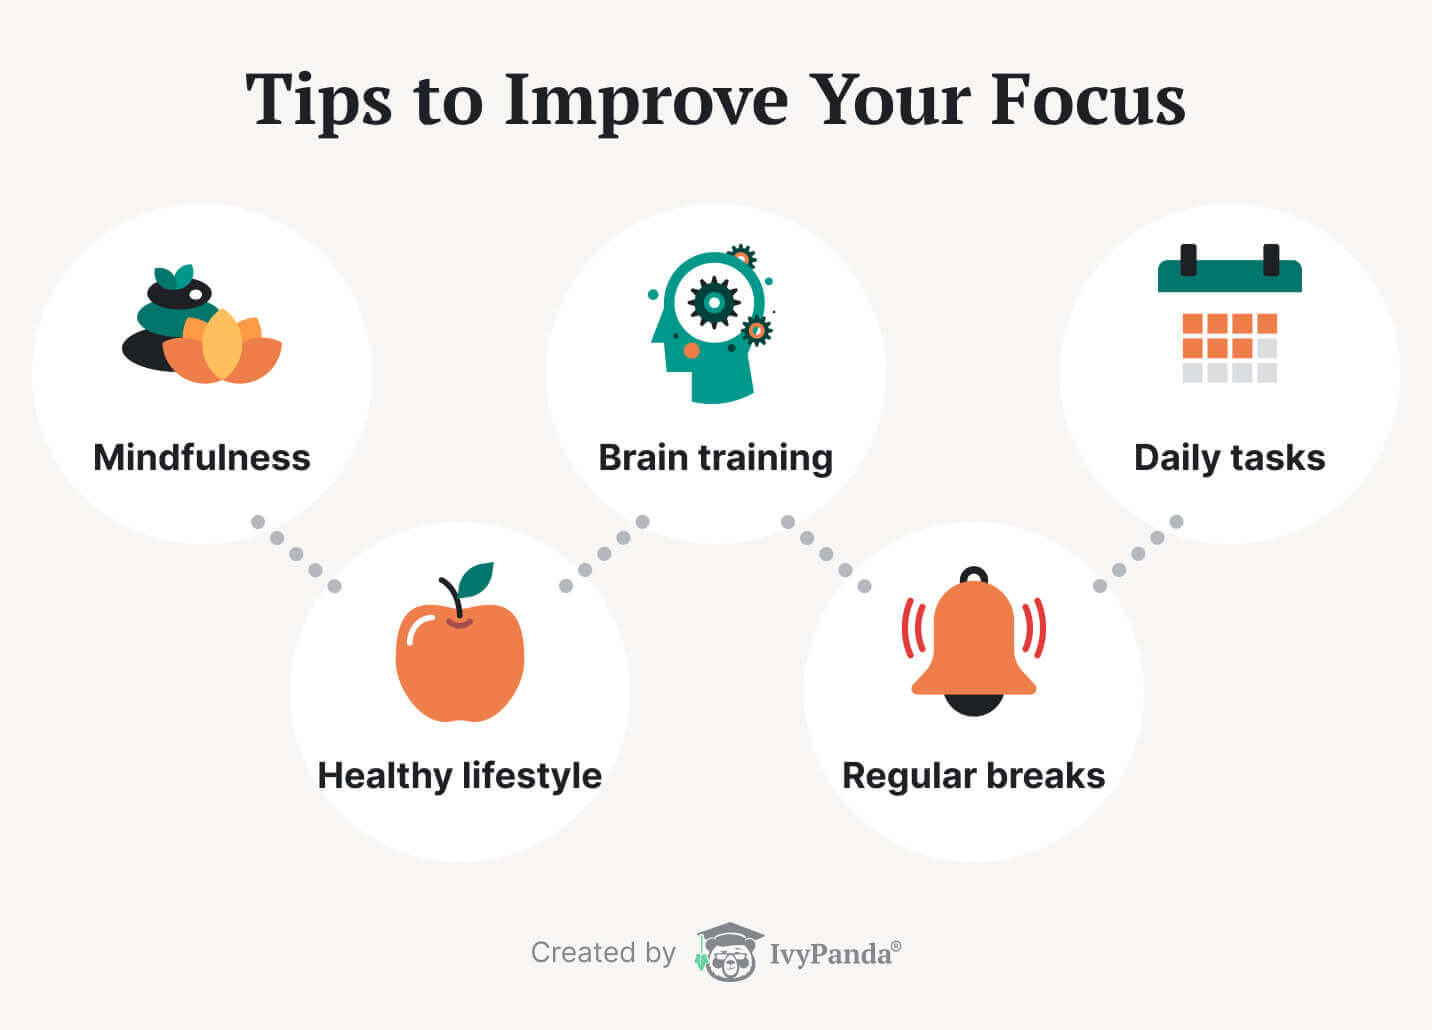 The picture provides the best tips to improving focus.